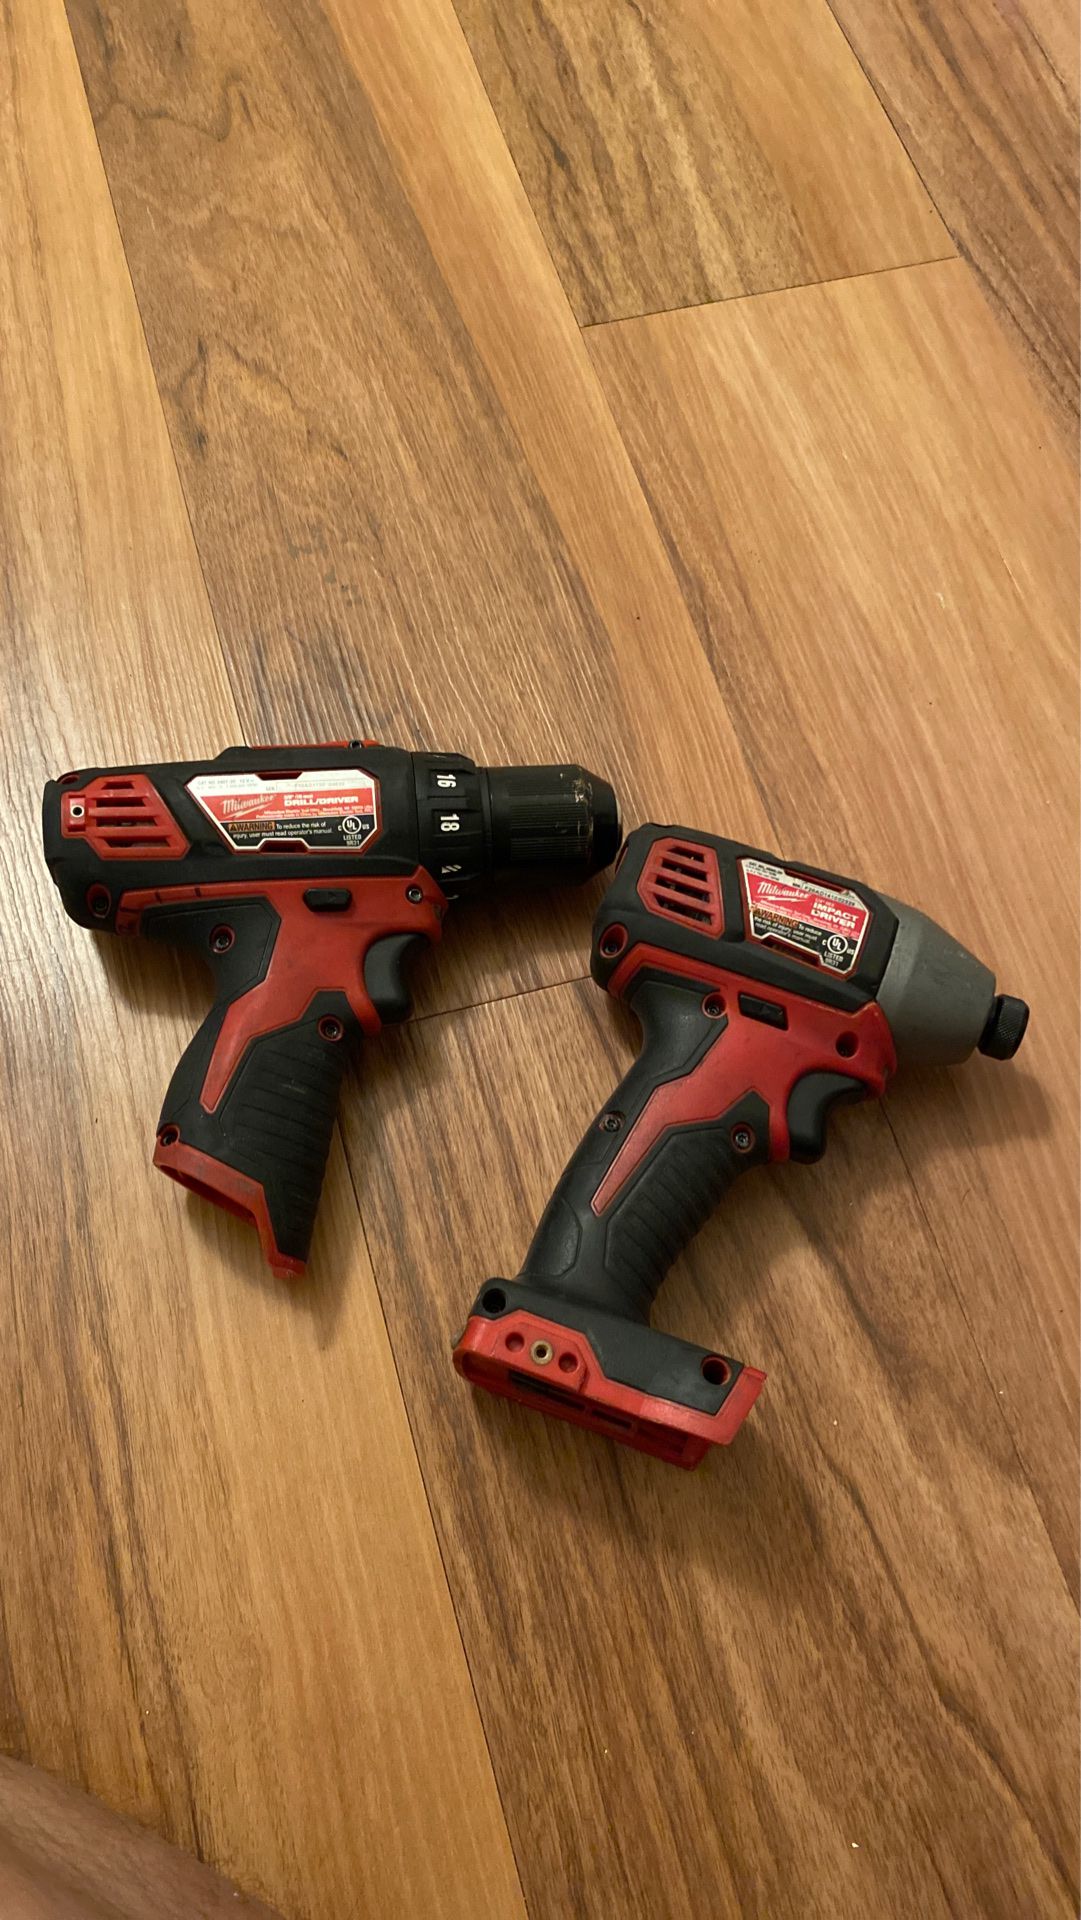 Milwaukee M18 impact drill and m12 driver drill